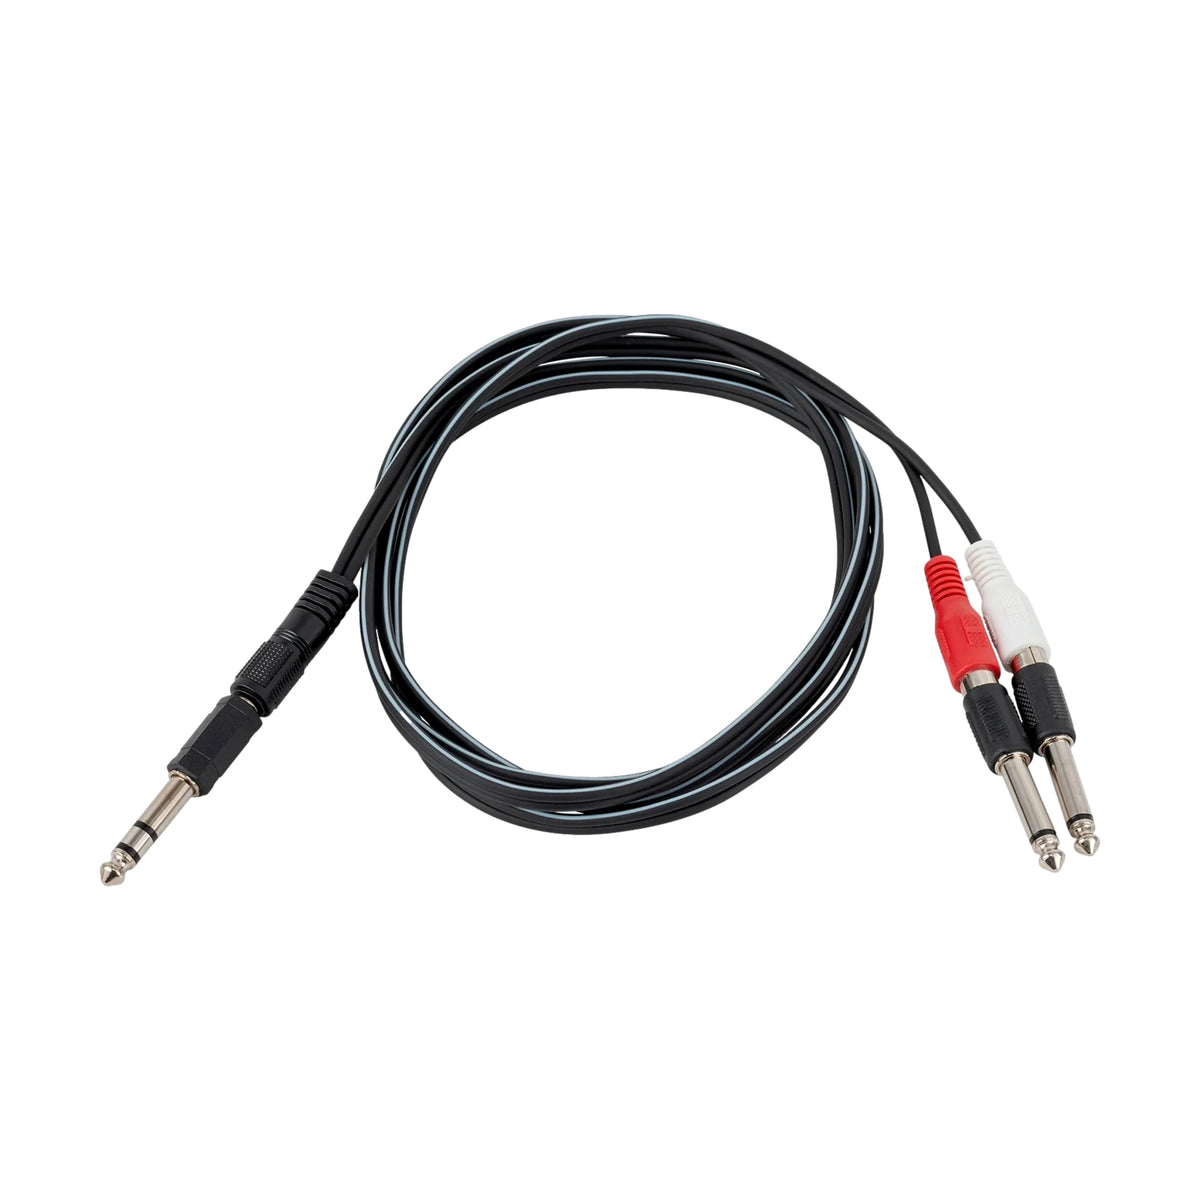 Australasian 6ft 3.5mm TRS-M to 2 x RCA Male Cable including Adapters